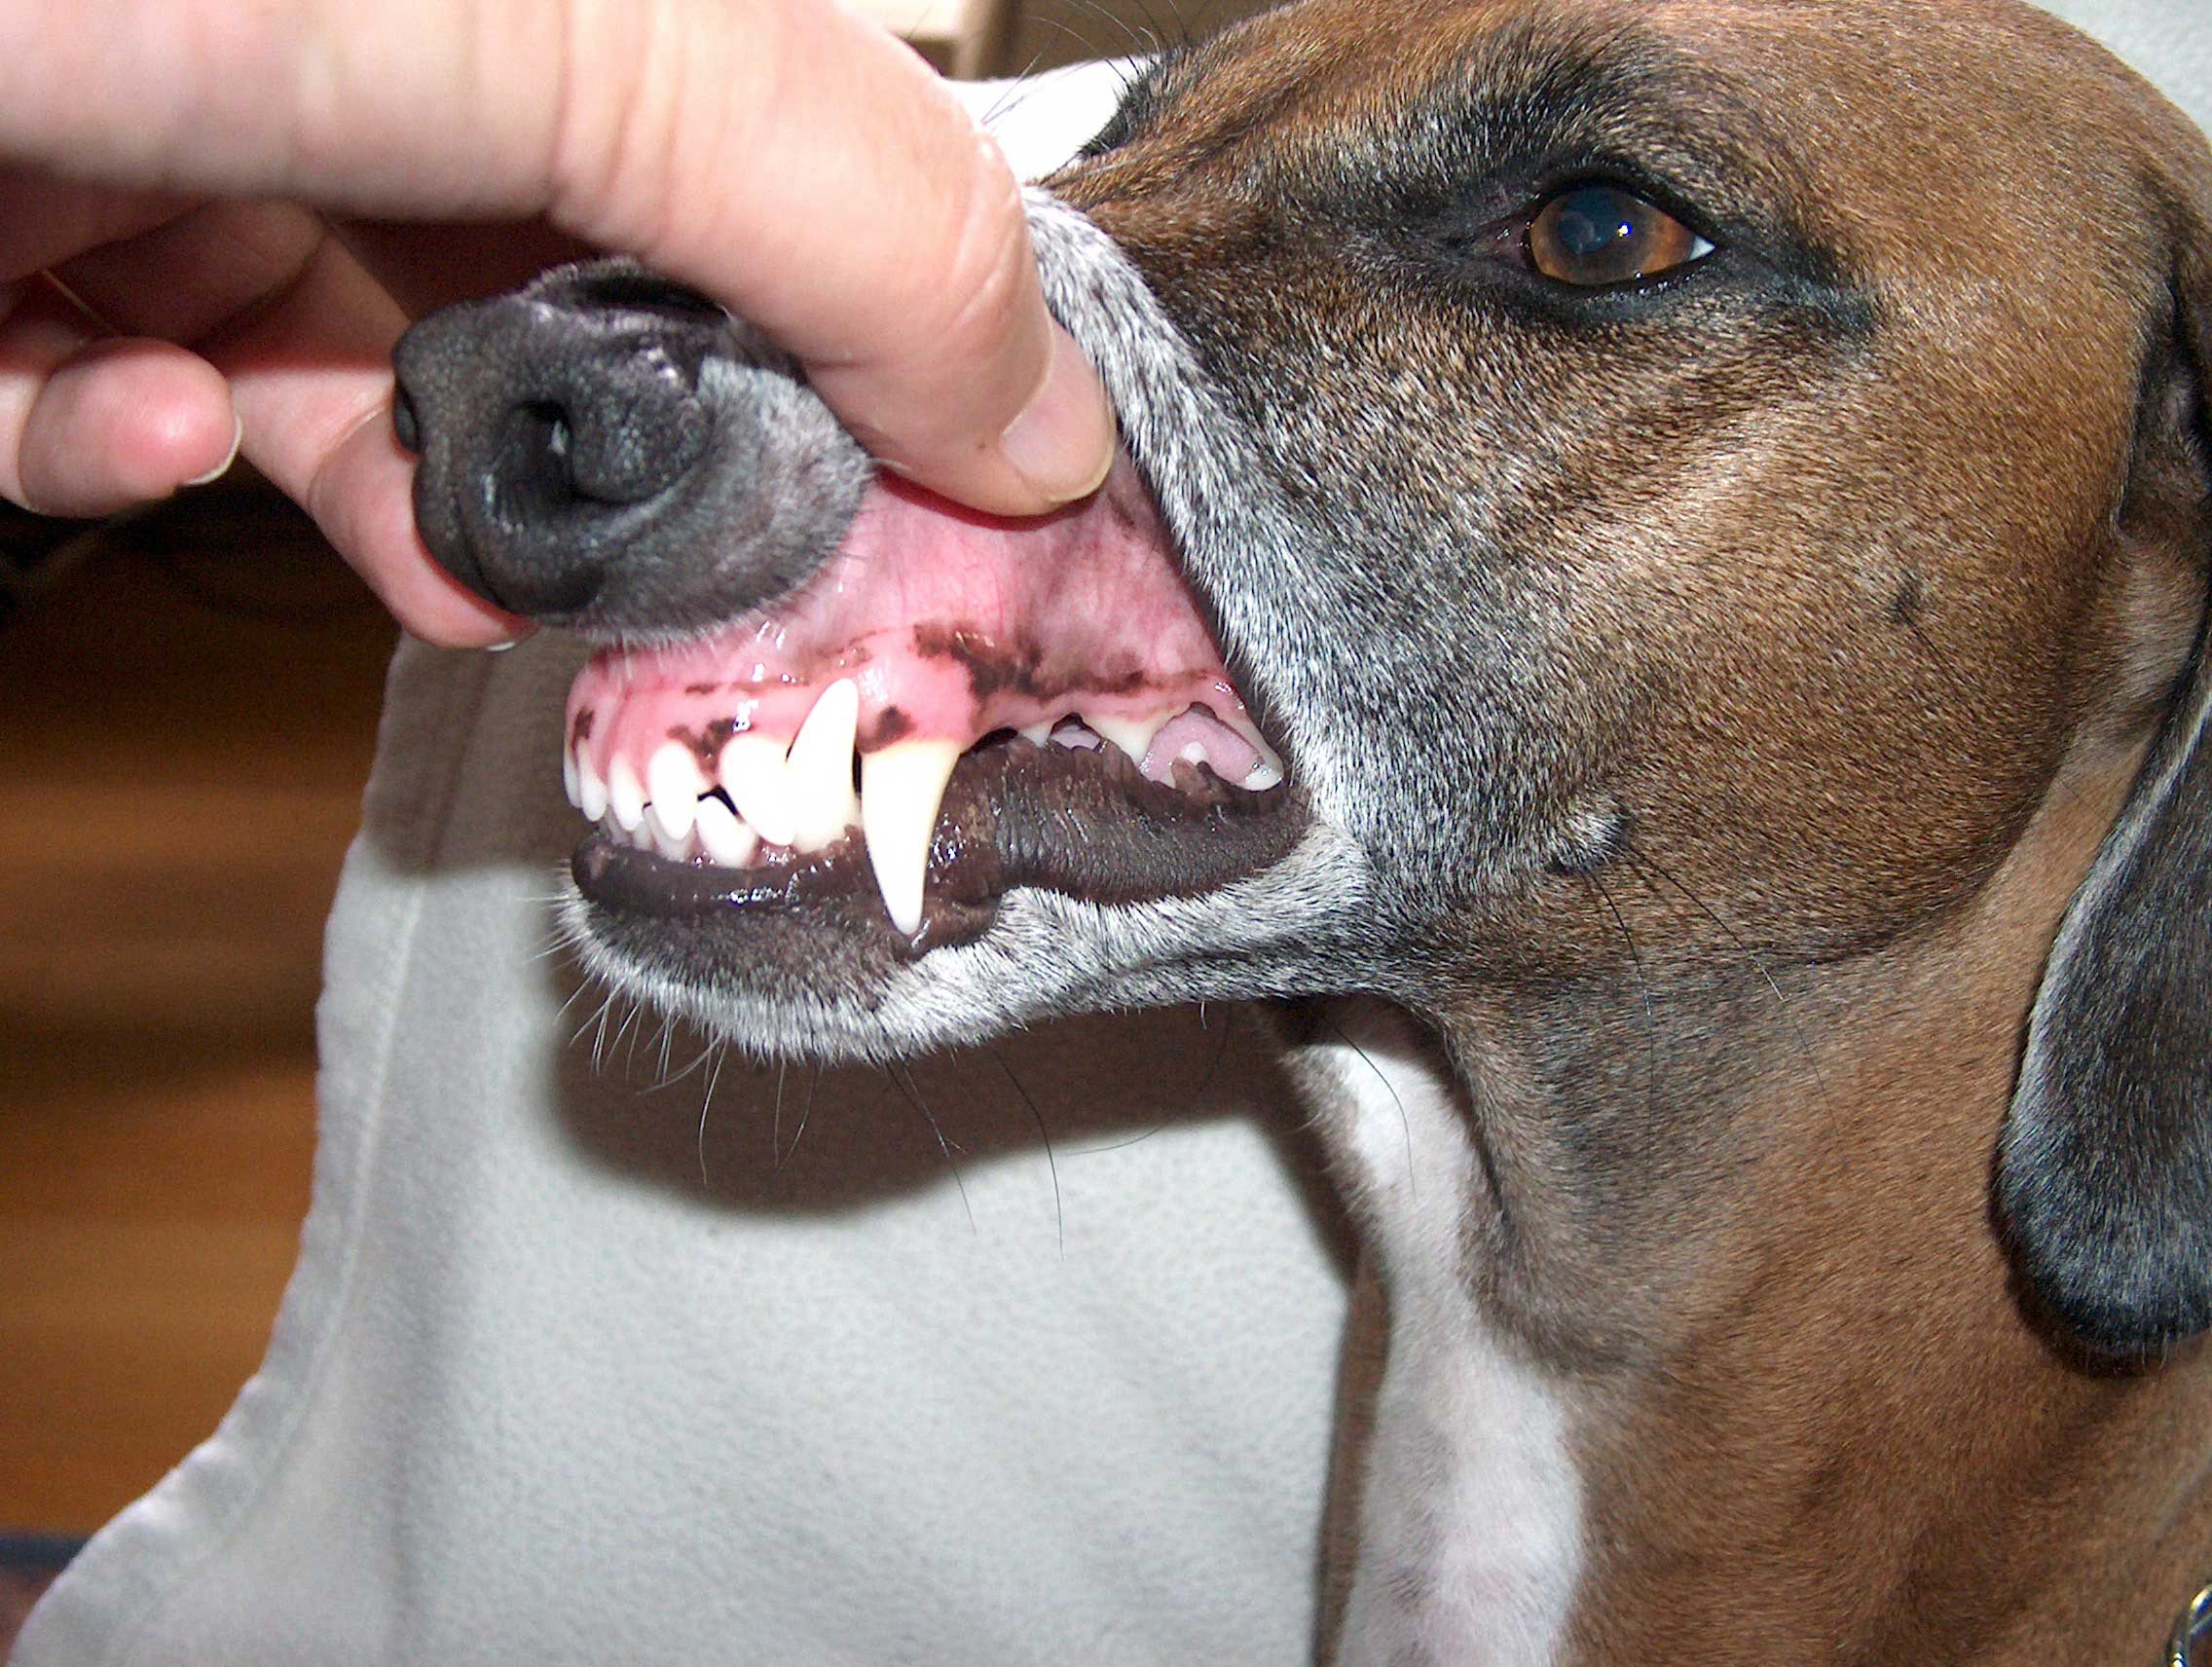 which are dogs canine teeth